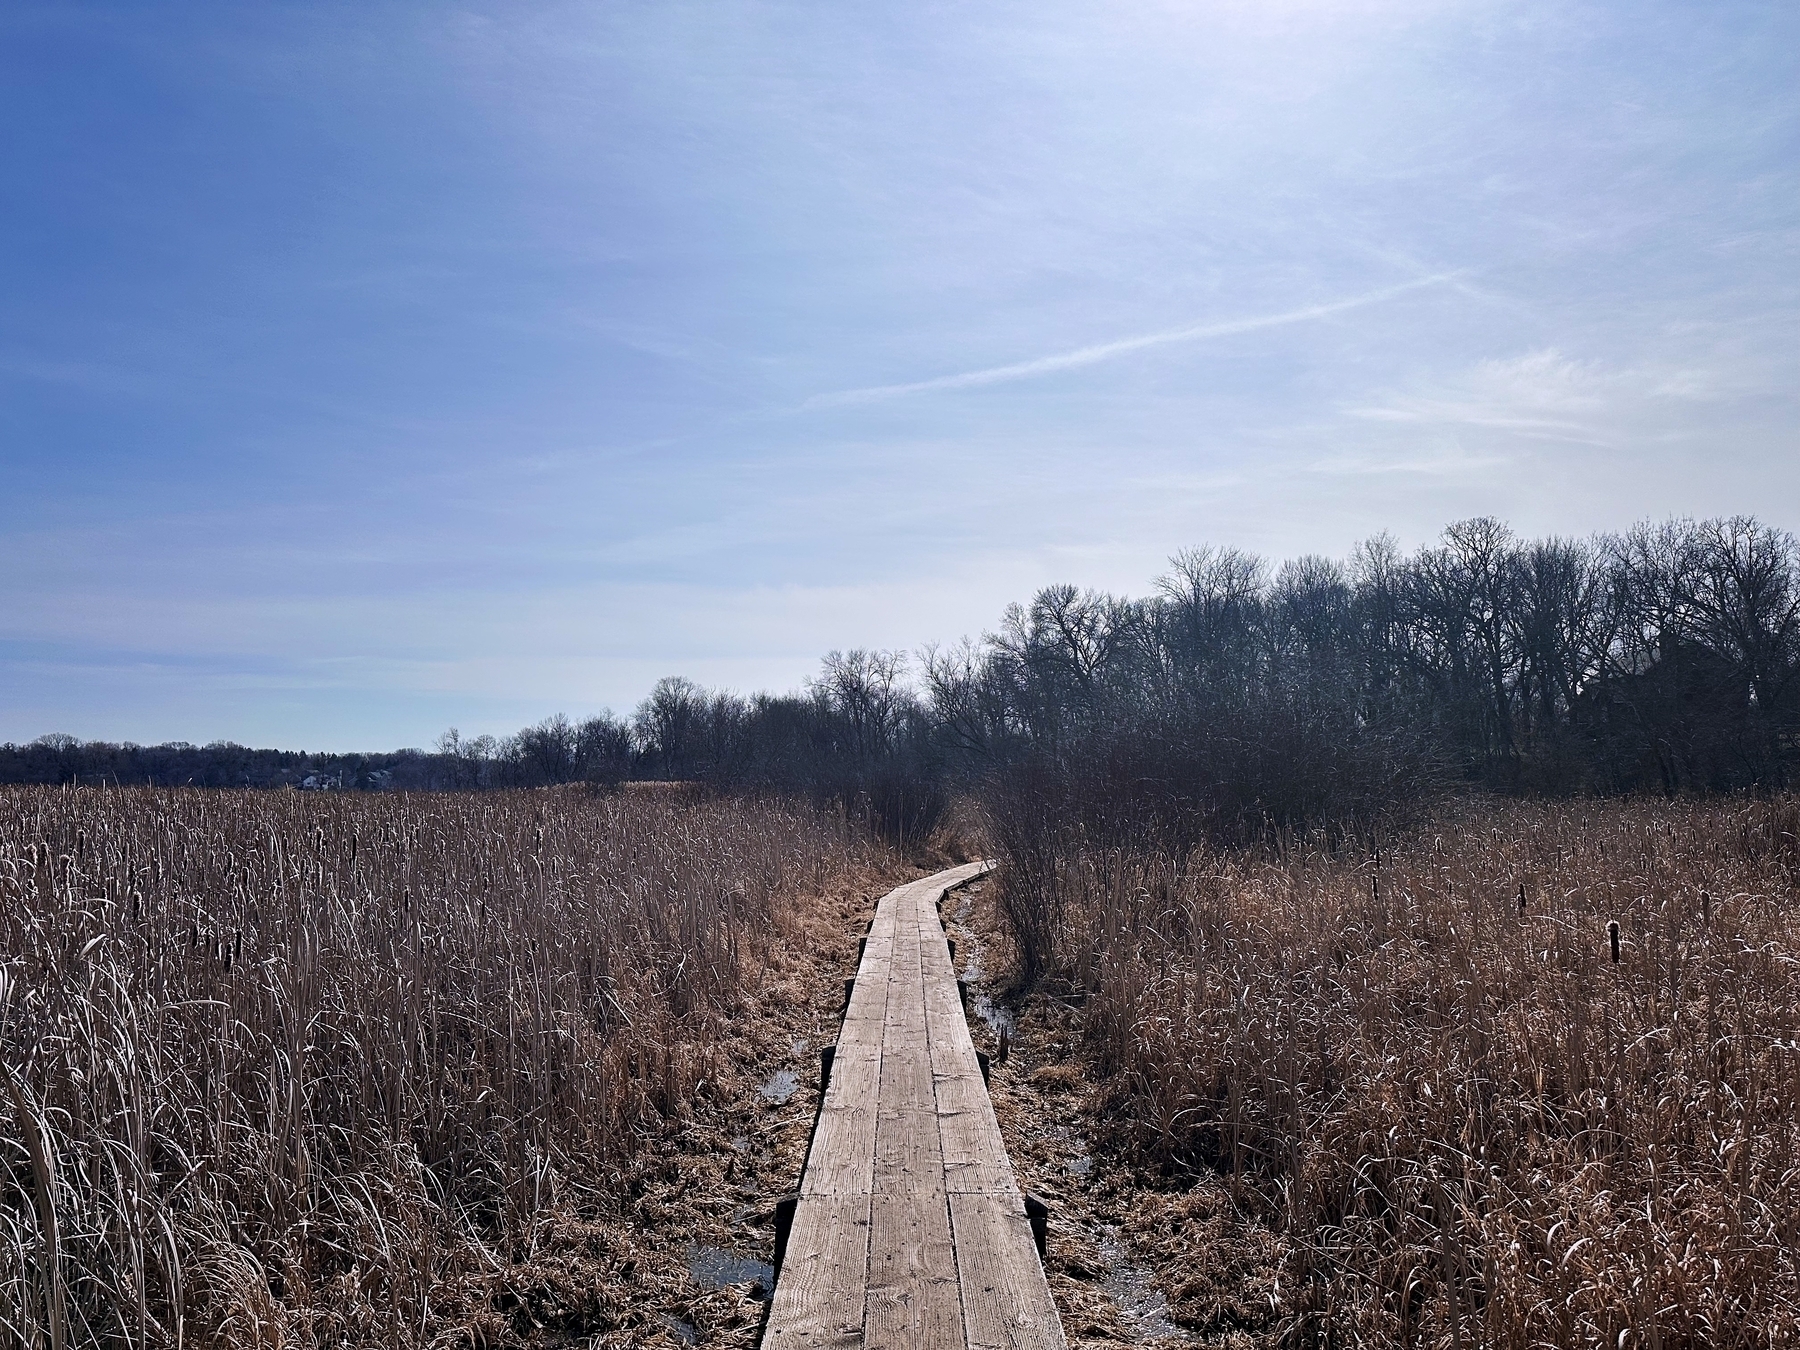 A wooden boardwalk meanders through tall, dry grass under a clear blue sky.